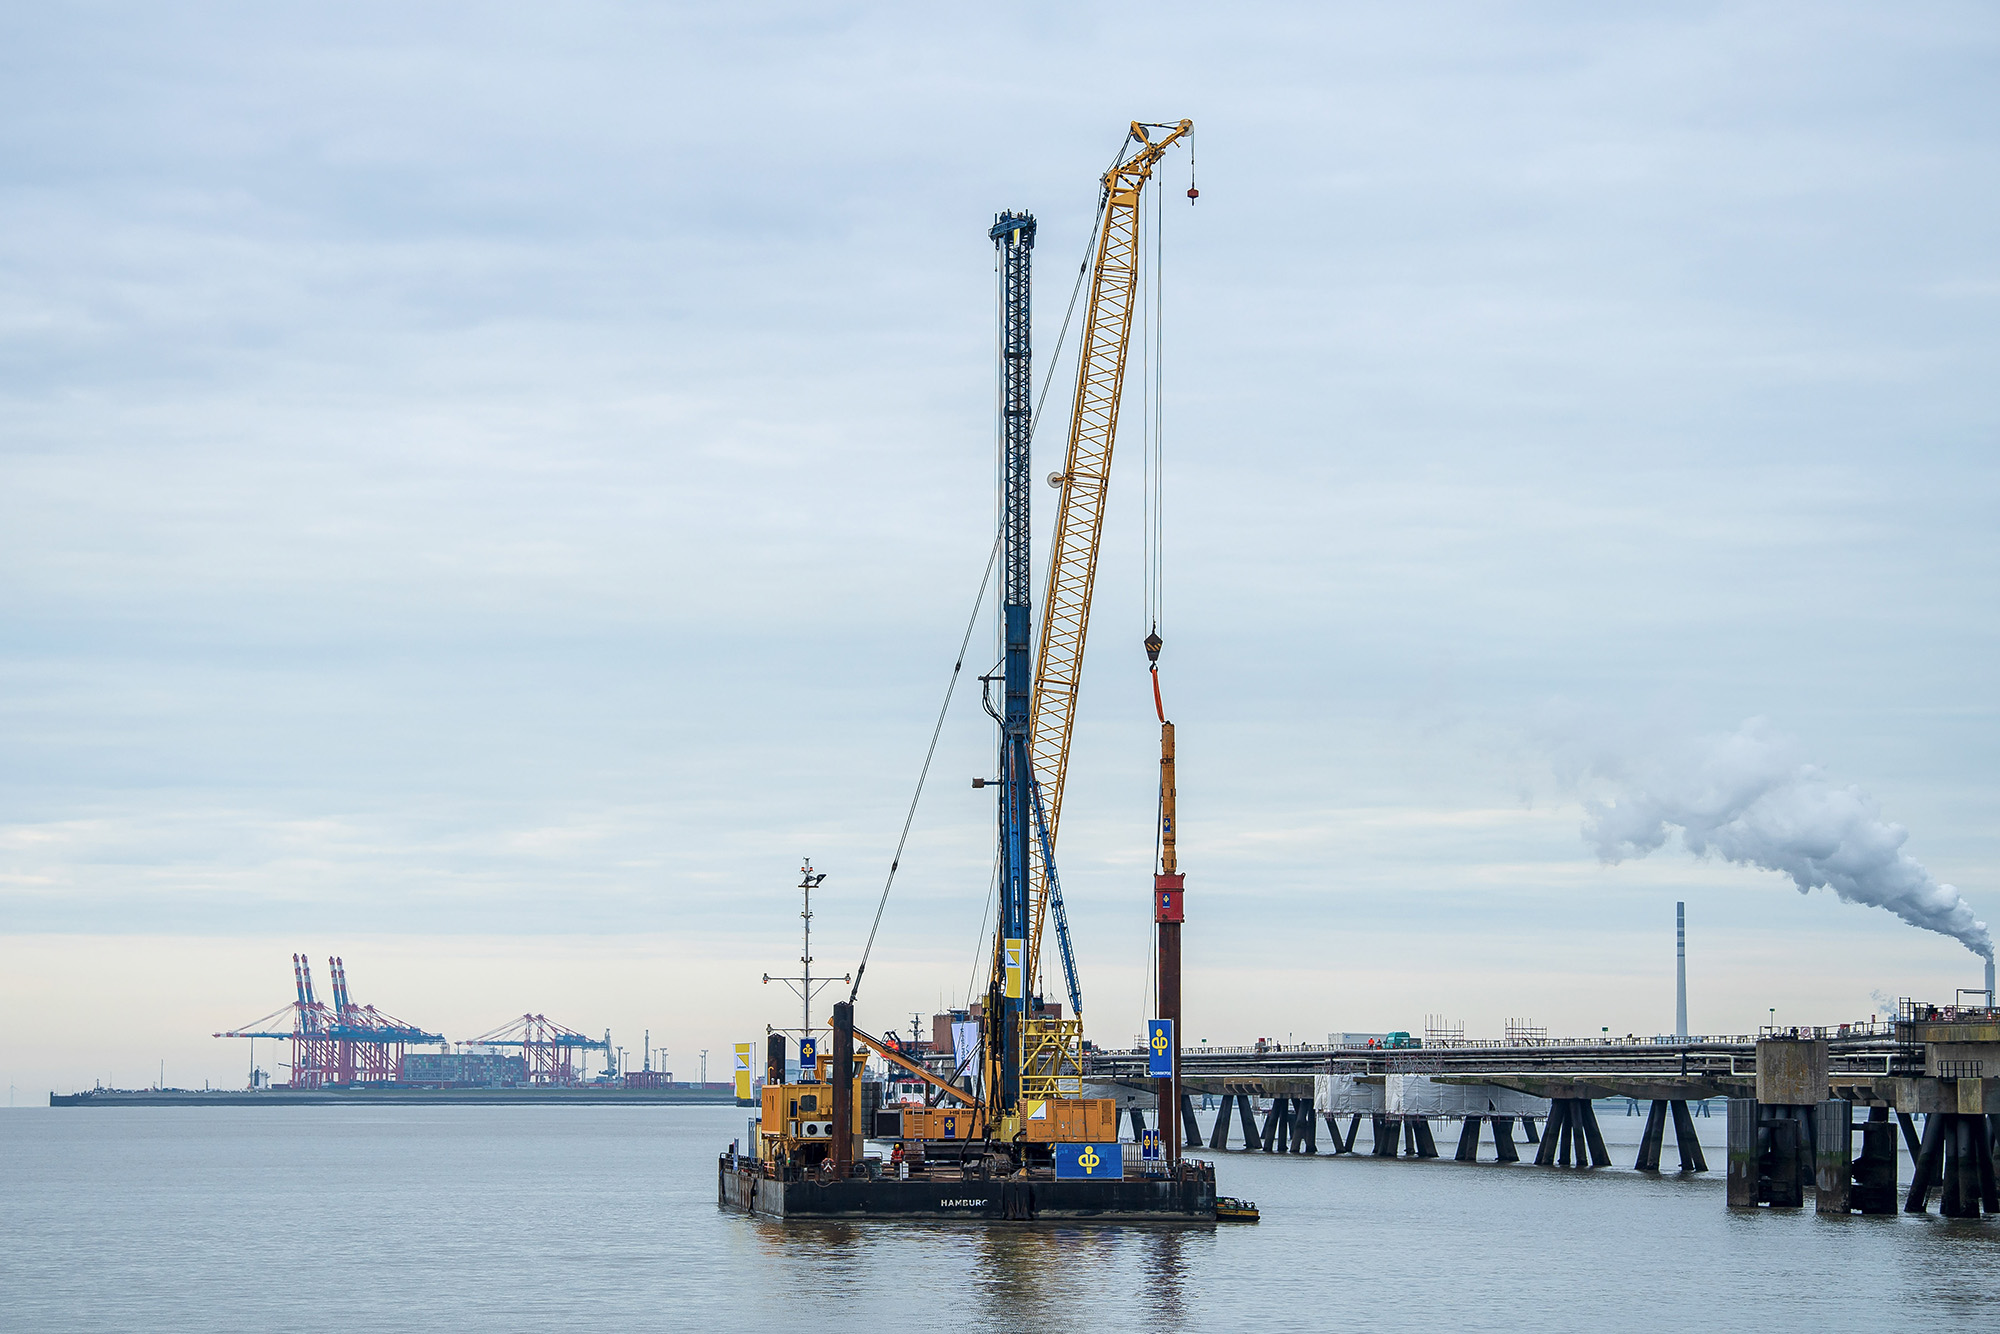 The first pile driving takes place at the future jetty for the FSRU (Floating Storage and Regasification Units) for liquefied natural gas imports to Germany in Wilhelmshaven, Lower Saxony, on May 5. 